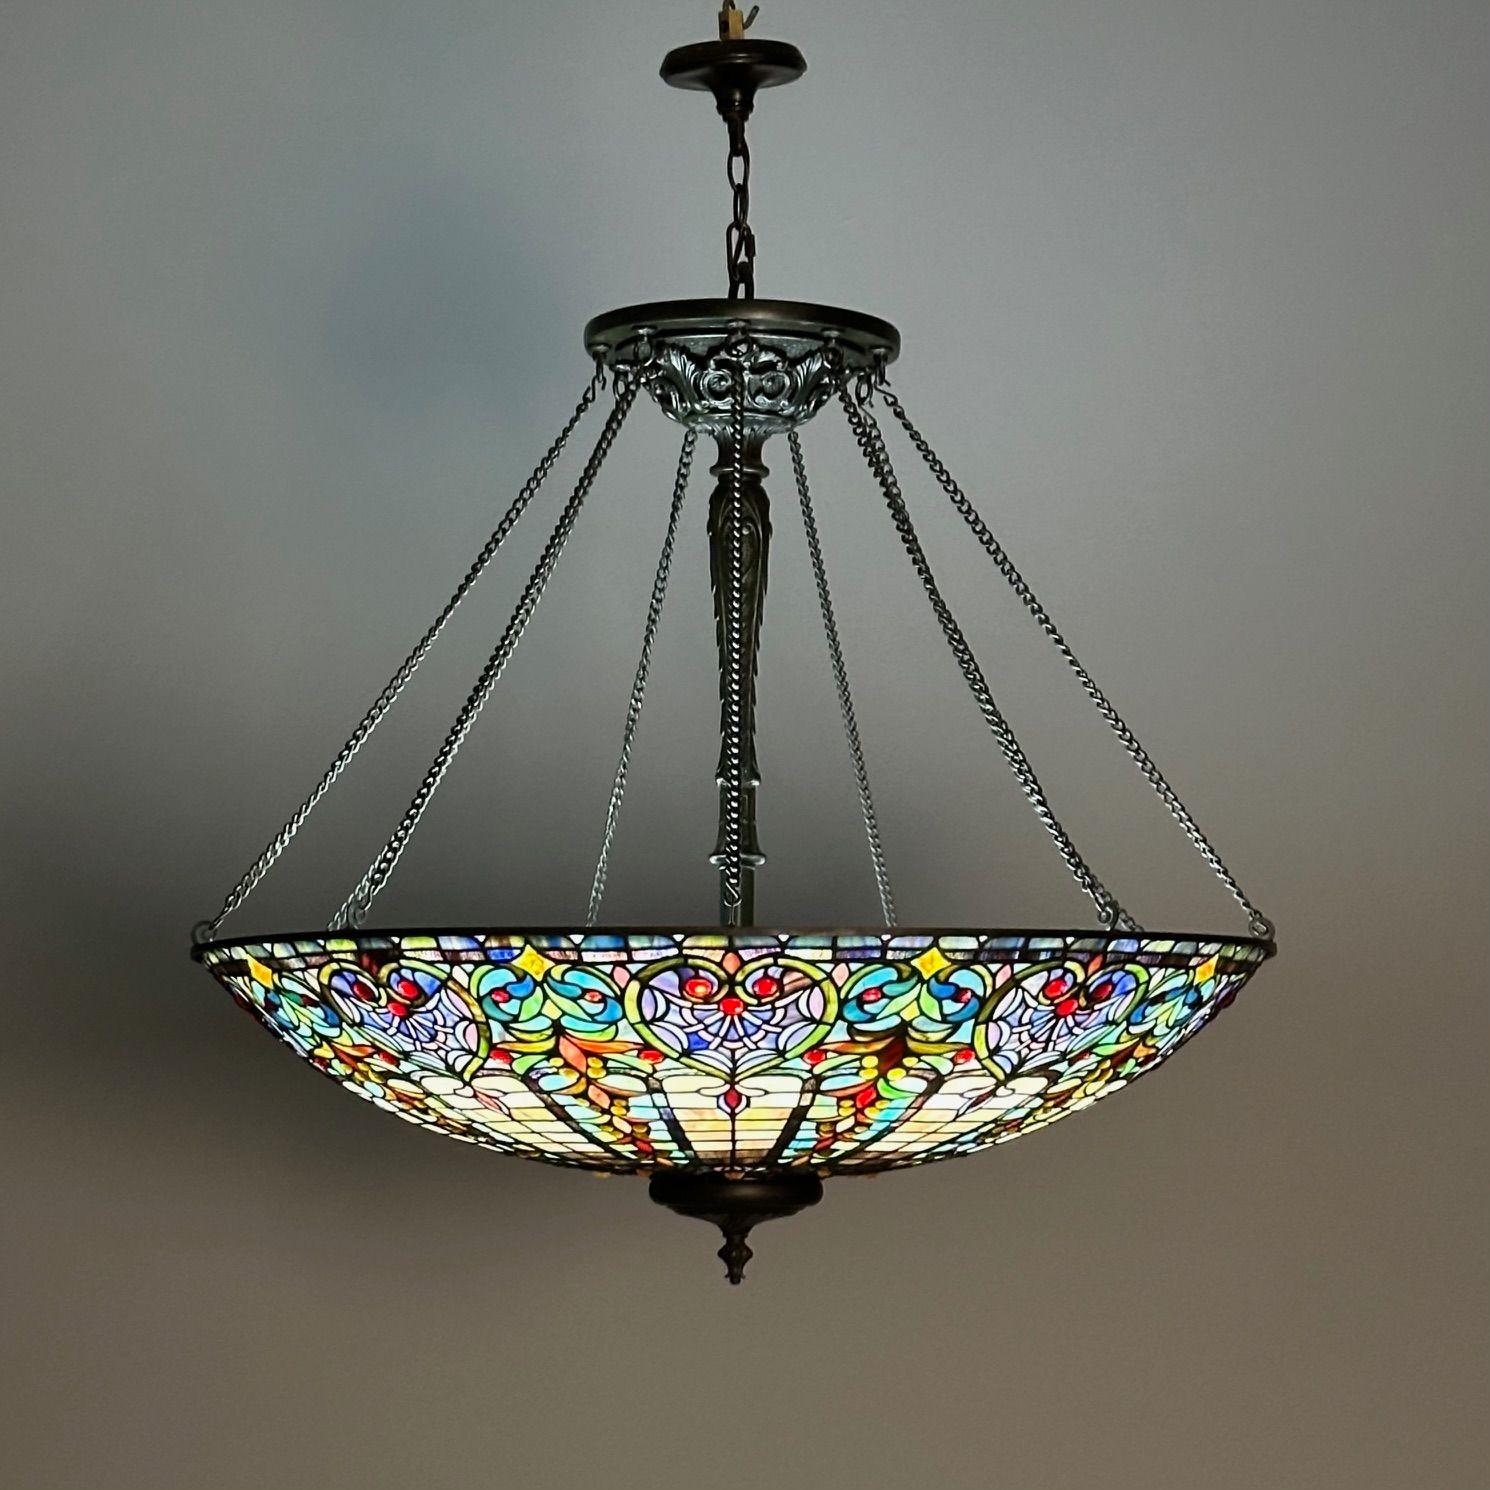 Quoizel, Tiffany Style, Bowl Chandelier, Resin, Art Glass, Bronze, 2010s
A finely detailed and highly decorative ceiling light in the Tiffany style. This large and impressive fixture is sure to add a gleaming addition to any room in the home or